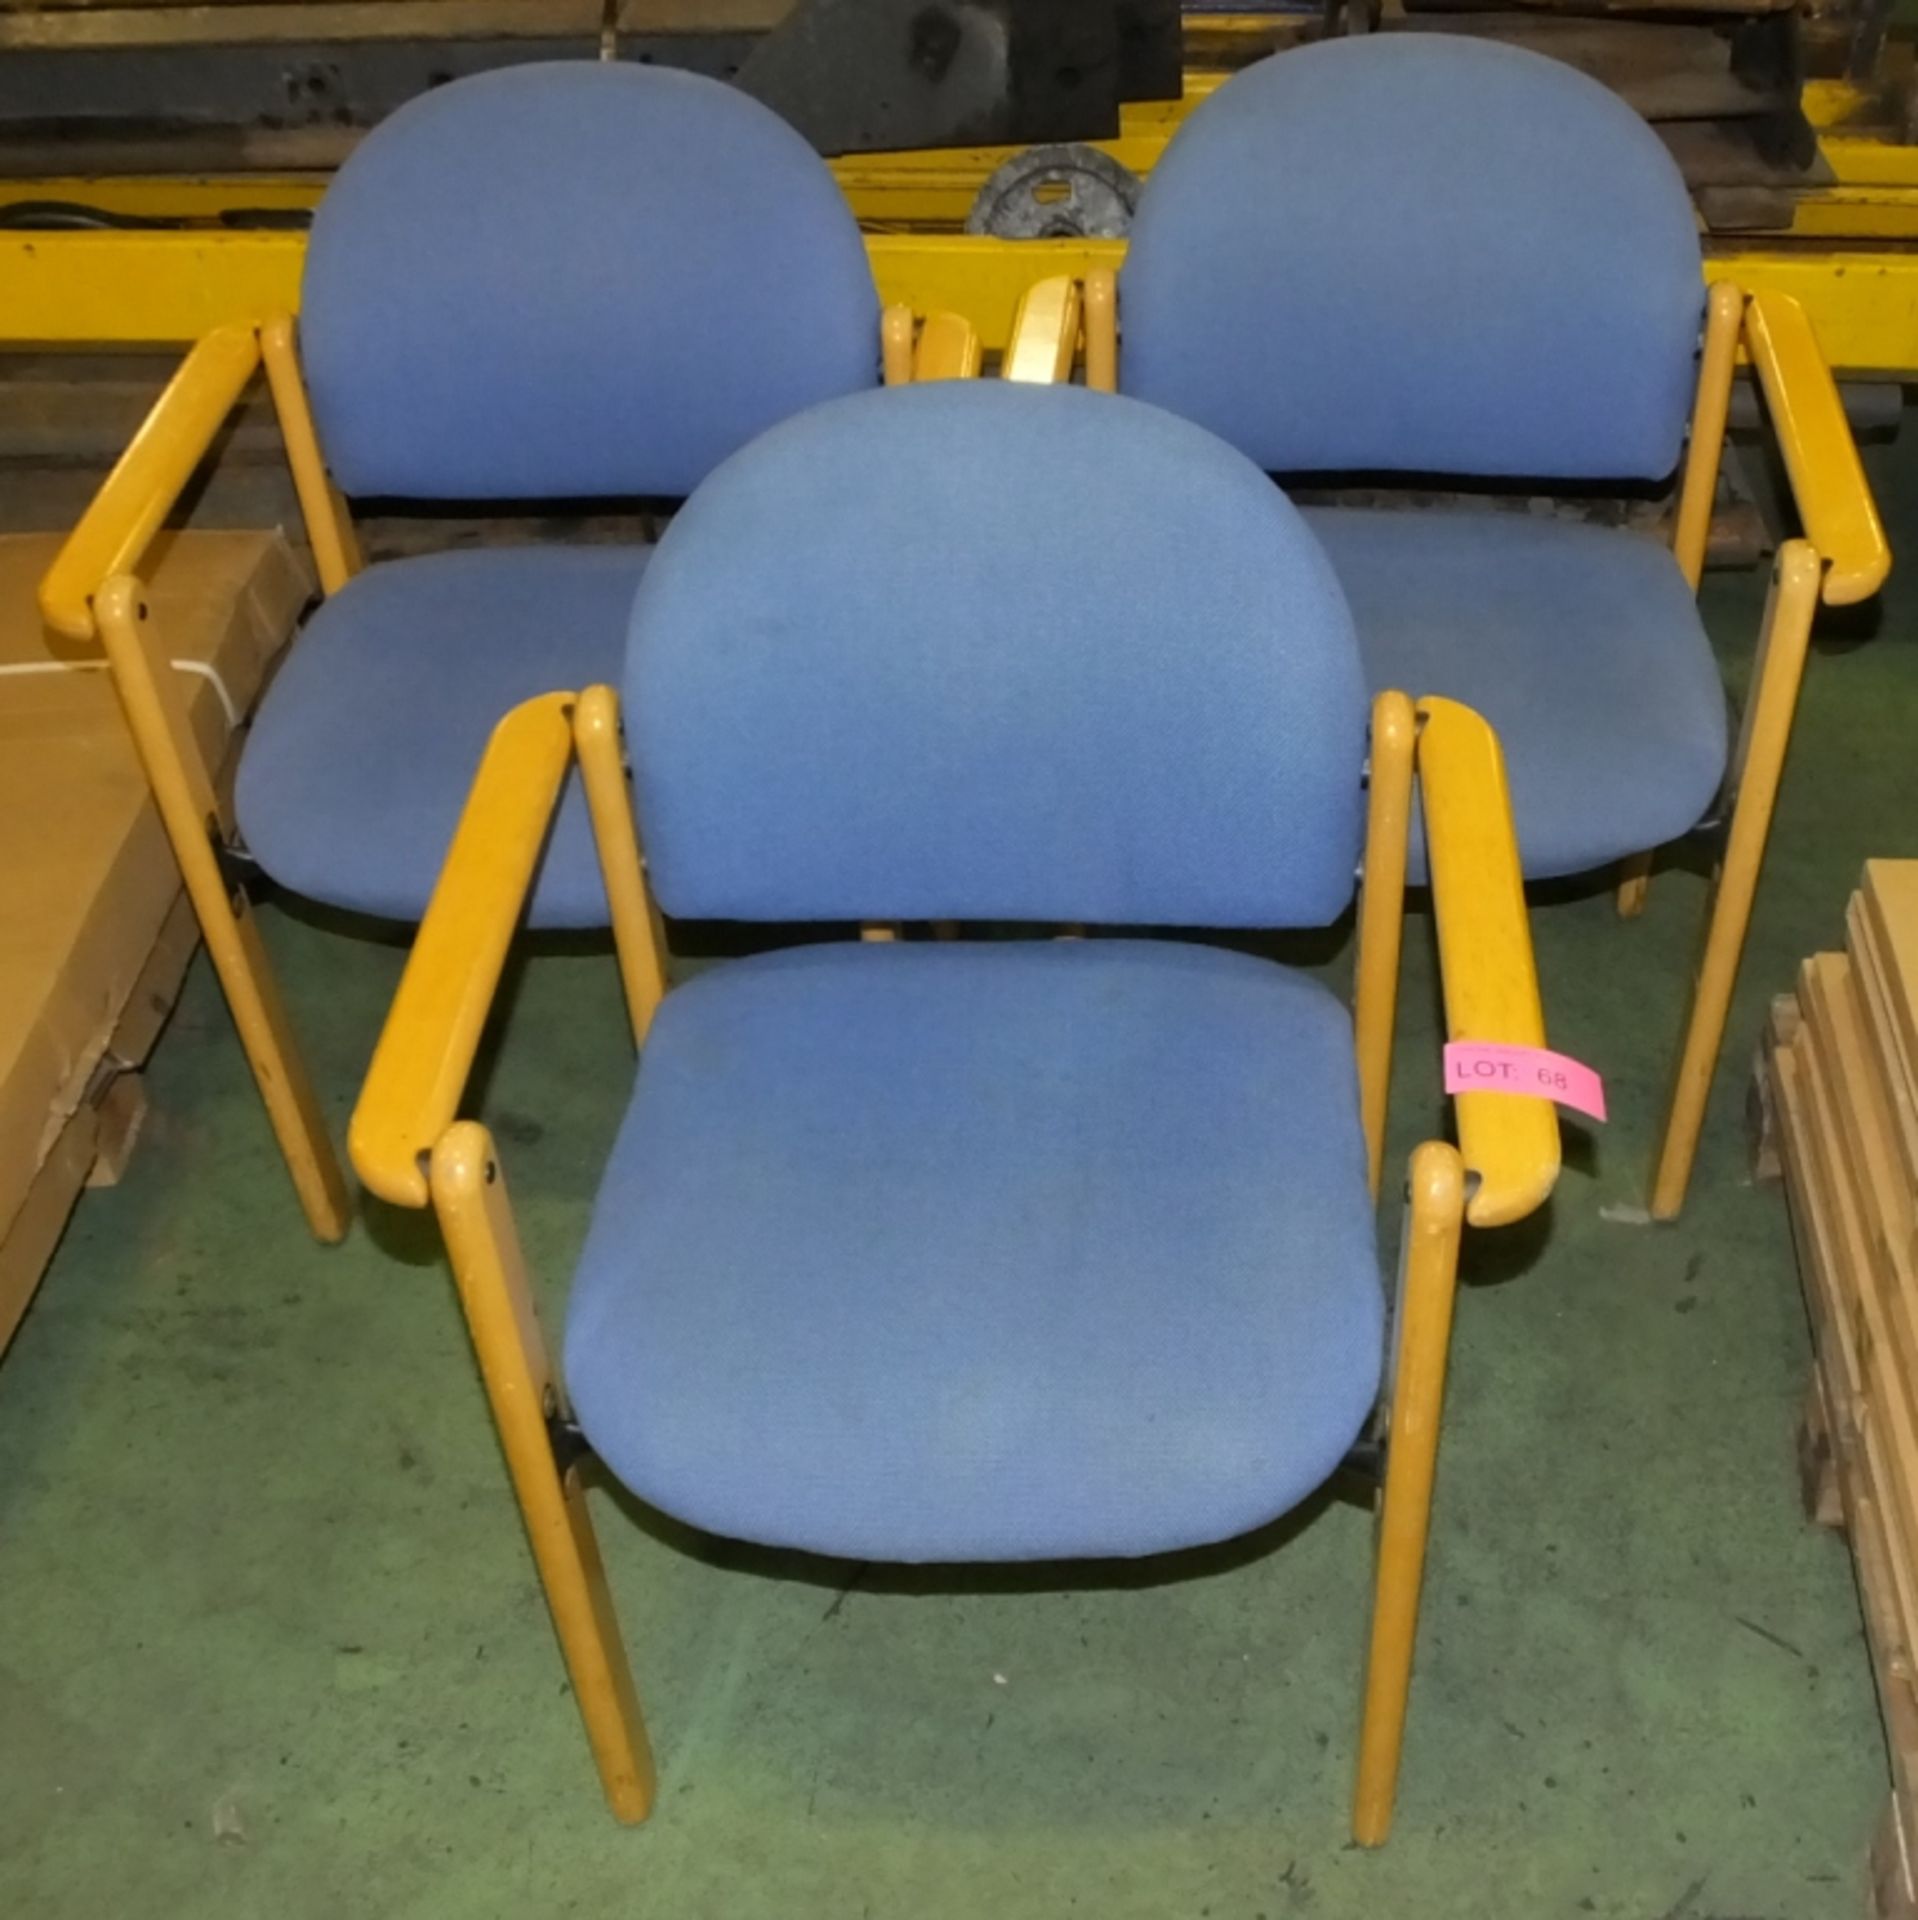 3x Reception chairs